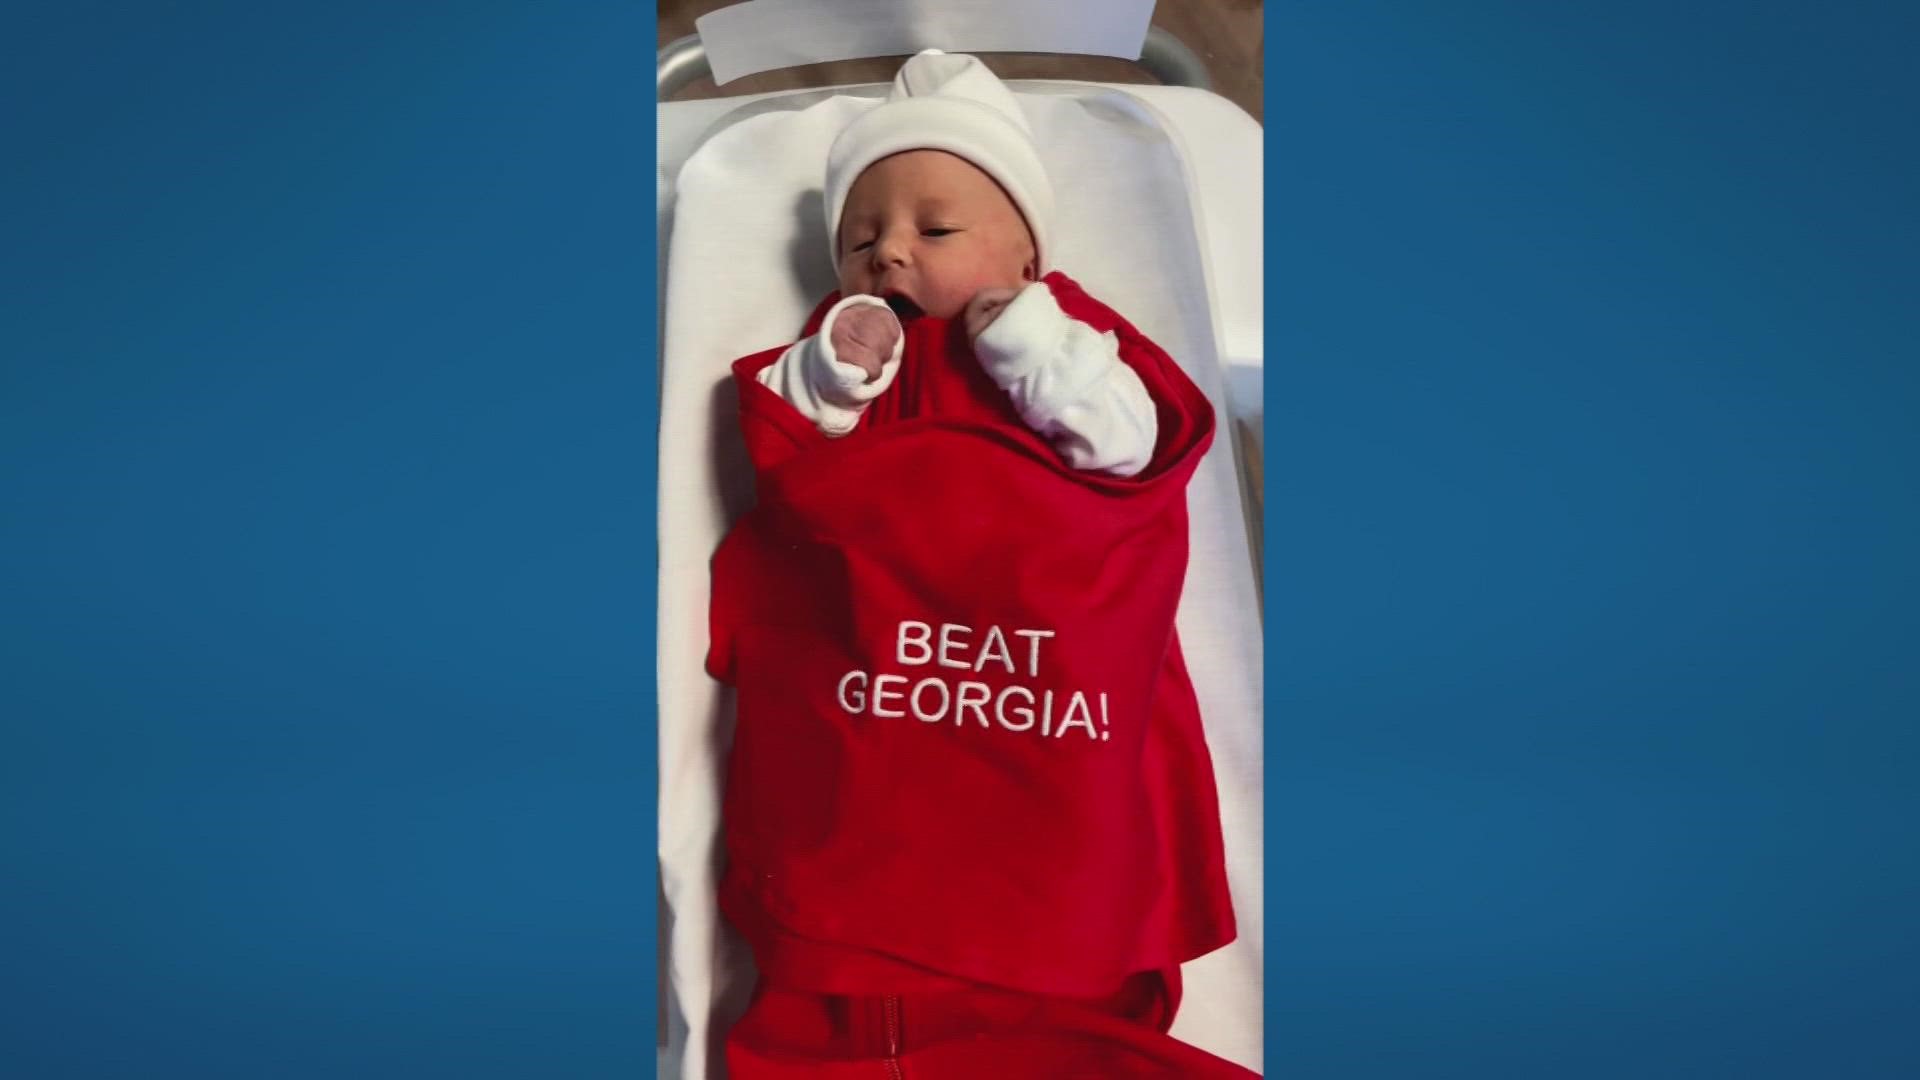 Every baby born this week at the Wexner Medical Center is wrapped in their own ‘Beat Georgia’ swaddle.